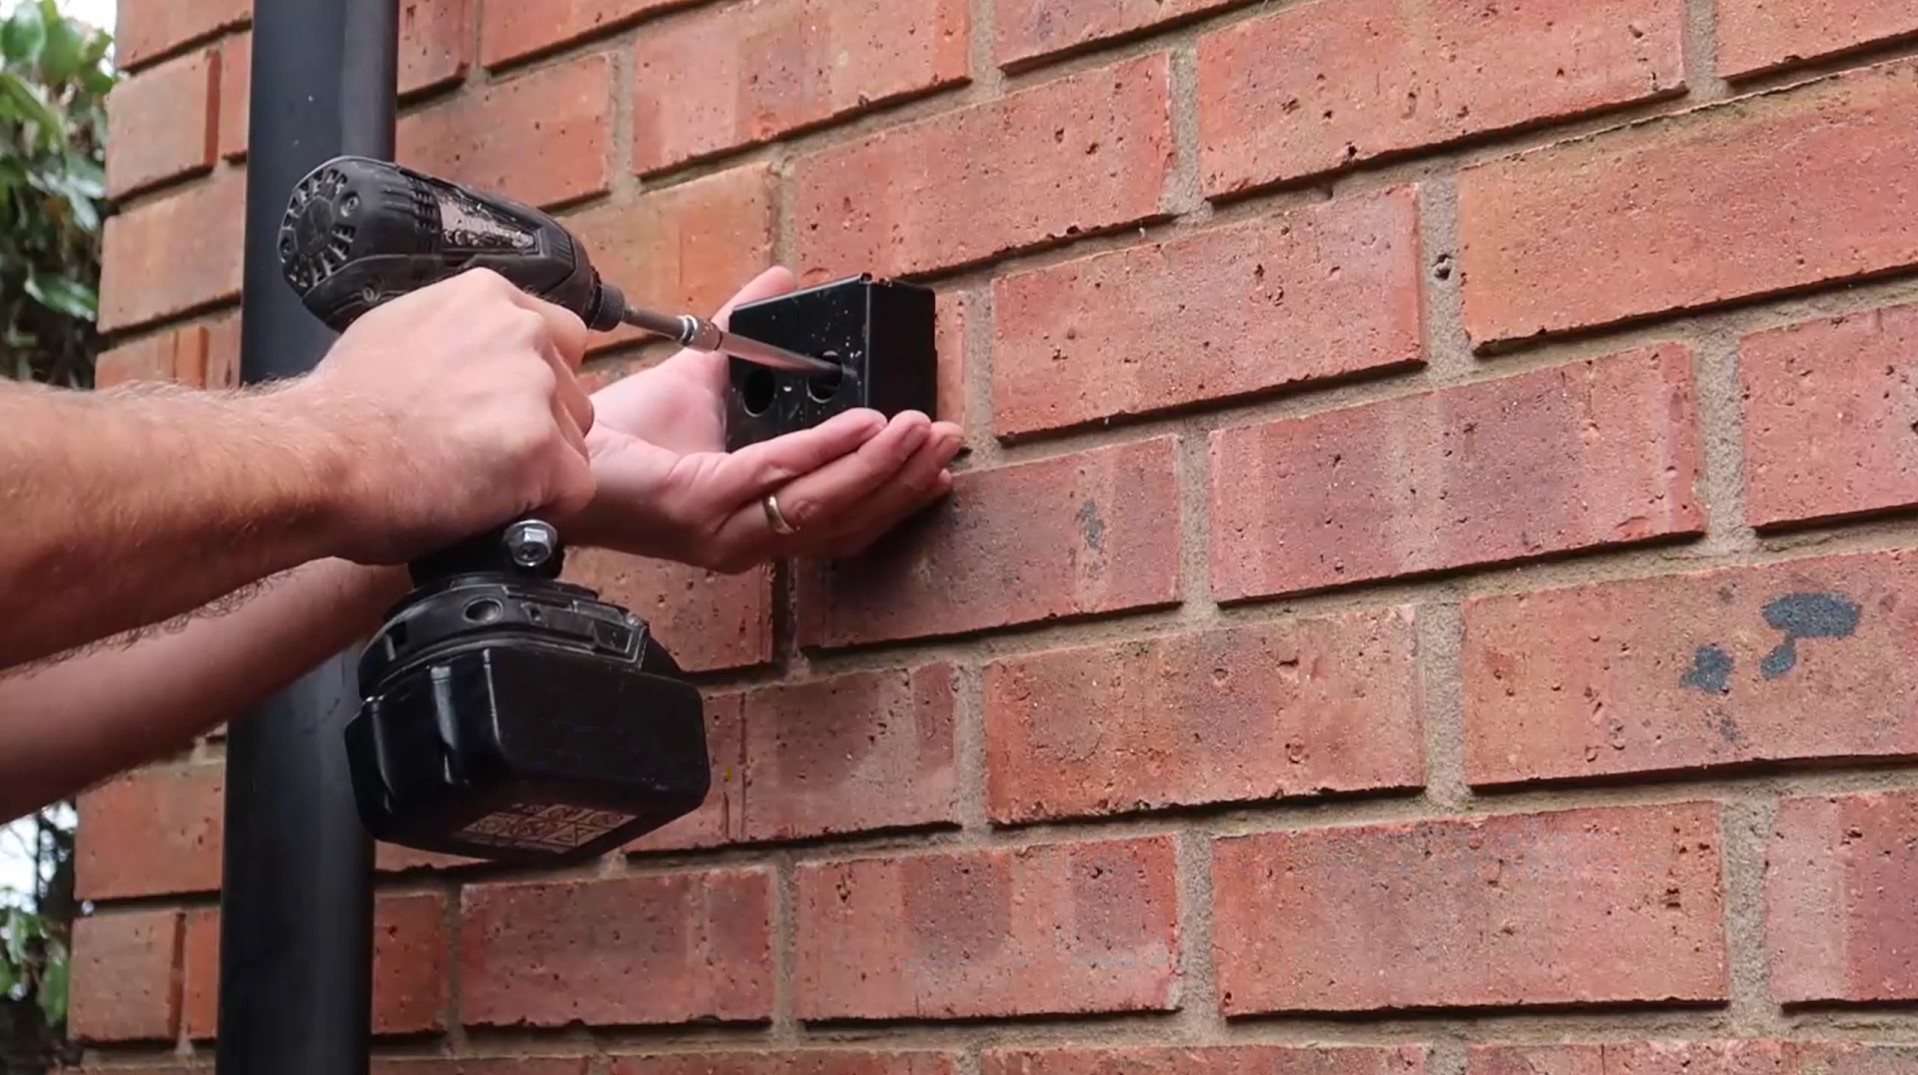 Installing a key safe on a brick wall - drilling holes